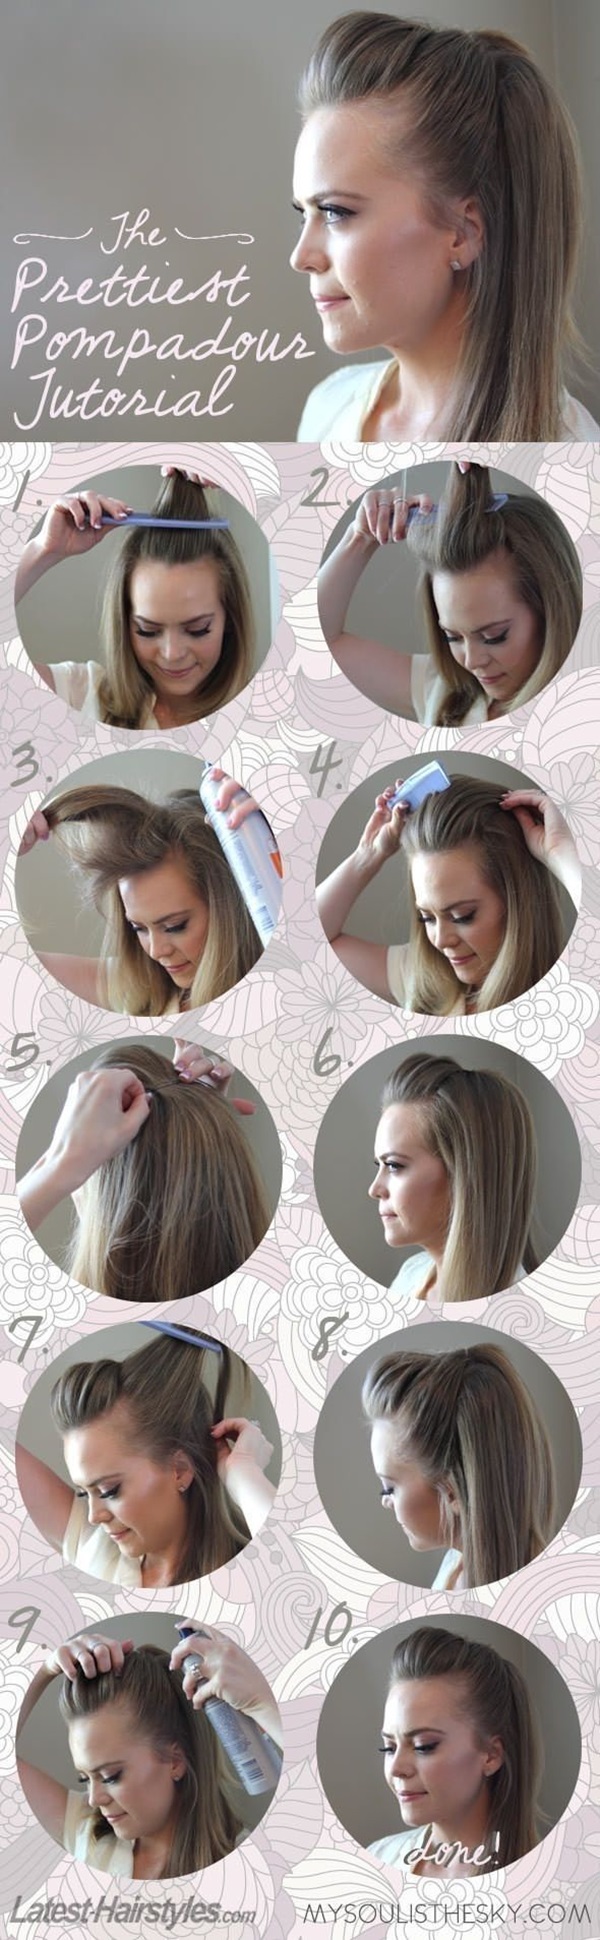 Simple Five Minute Hairstyles (24)